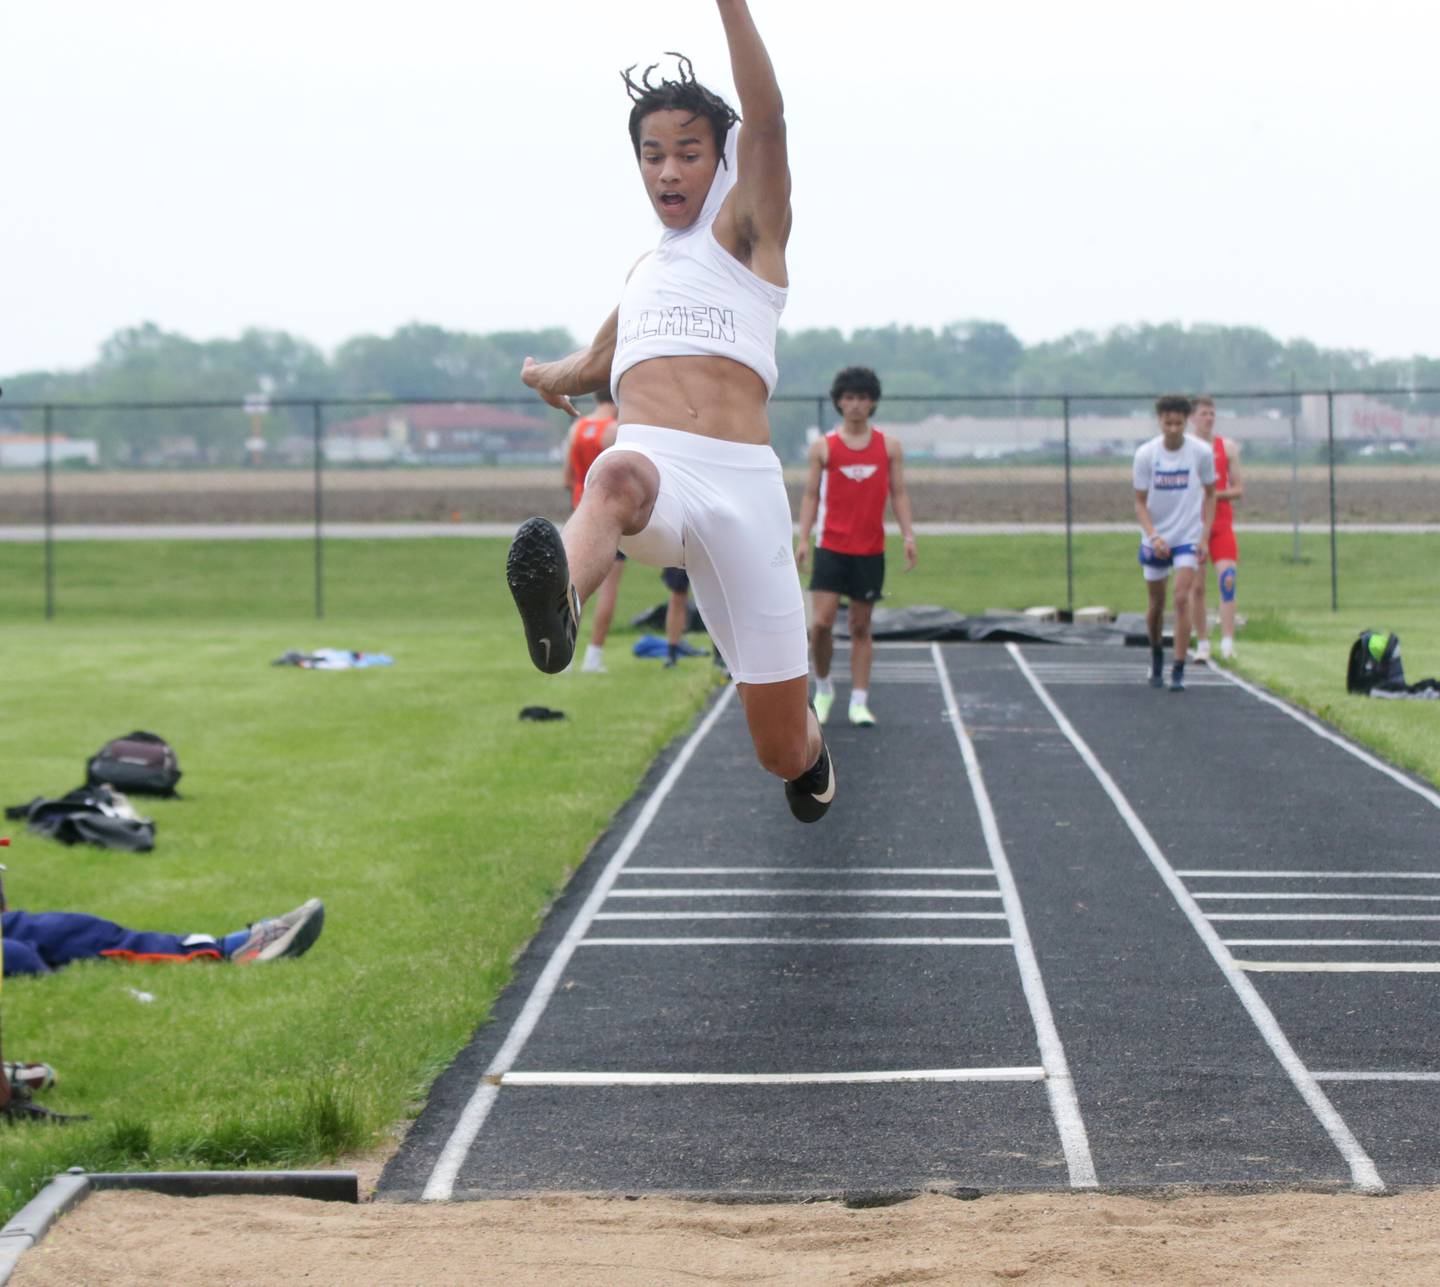 Joliet Catholic's Adrian Washington competes in the long jump in the Class 1A Boys Sectional track meet on Friday, May 20, 2022 in Plano.